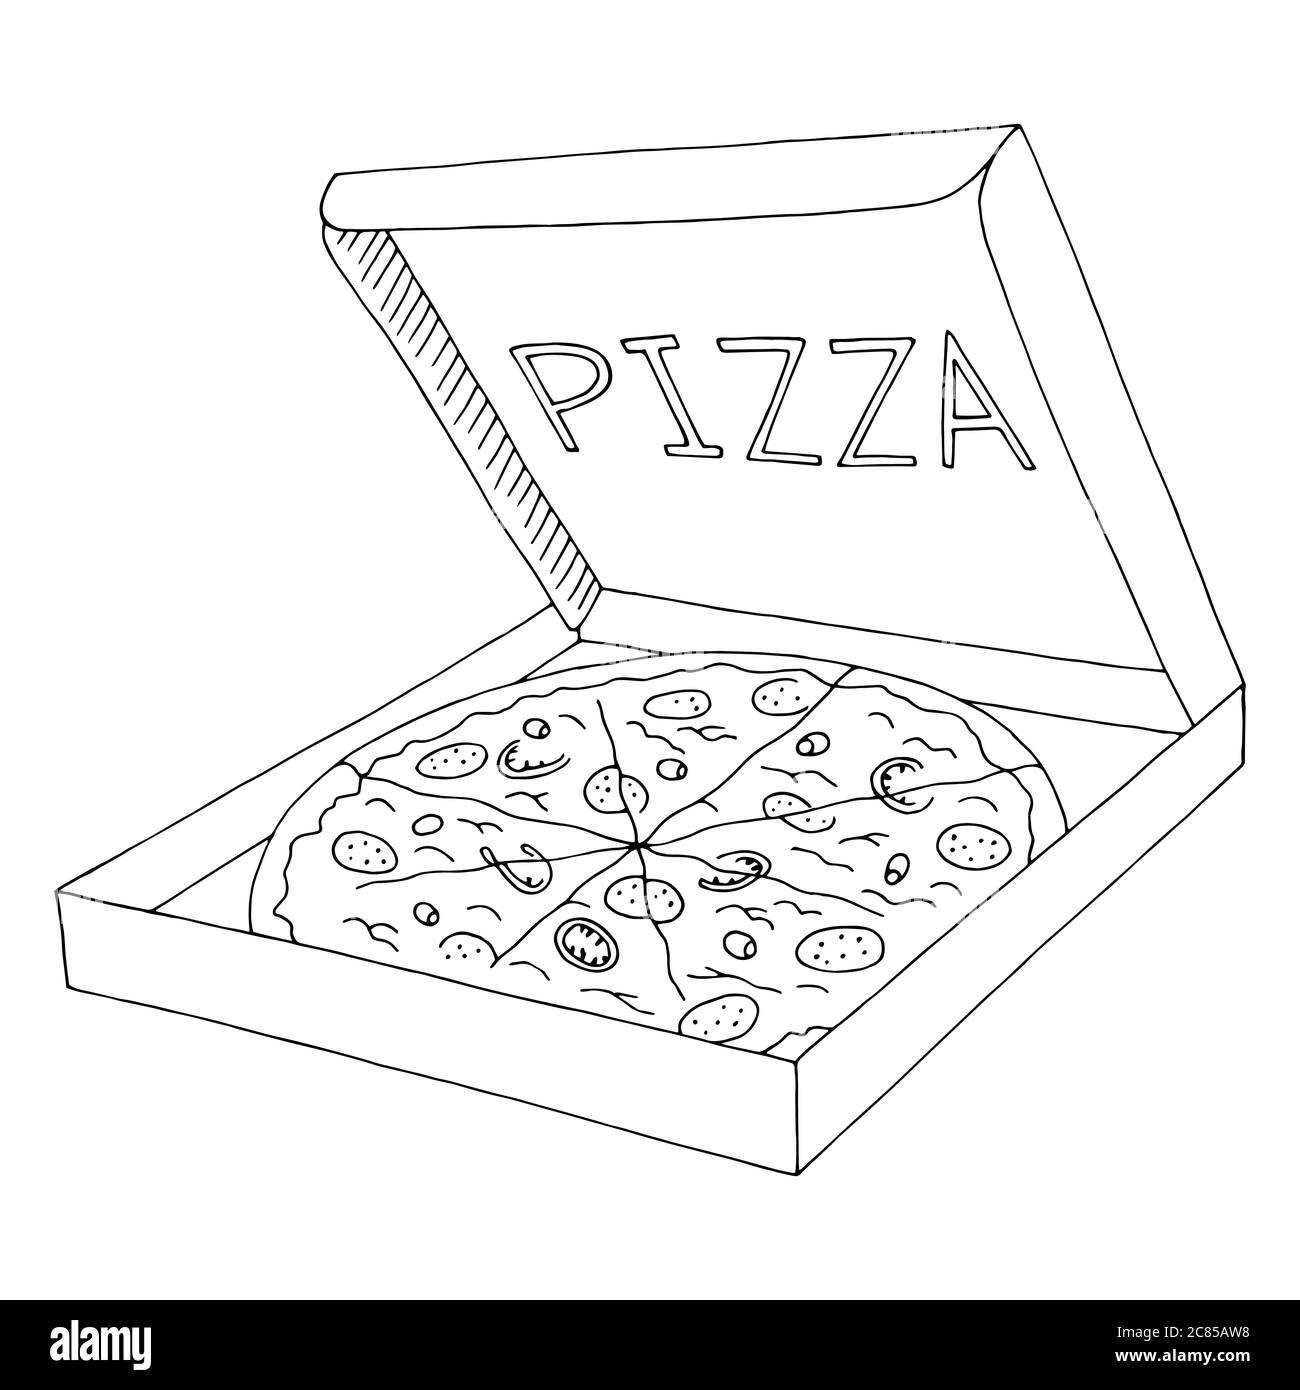 Pizza in box graphic fast food black white sketch isolated illustration vector Stock Vector